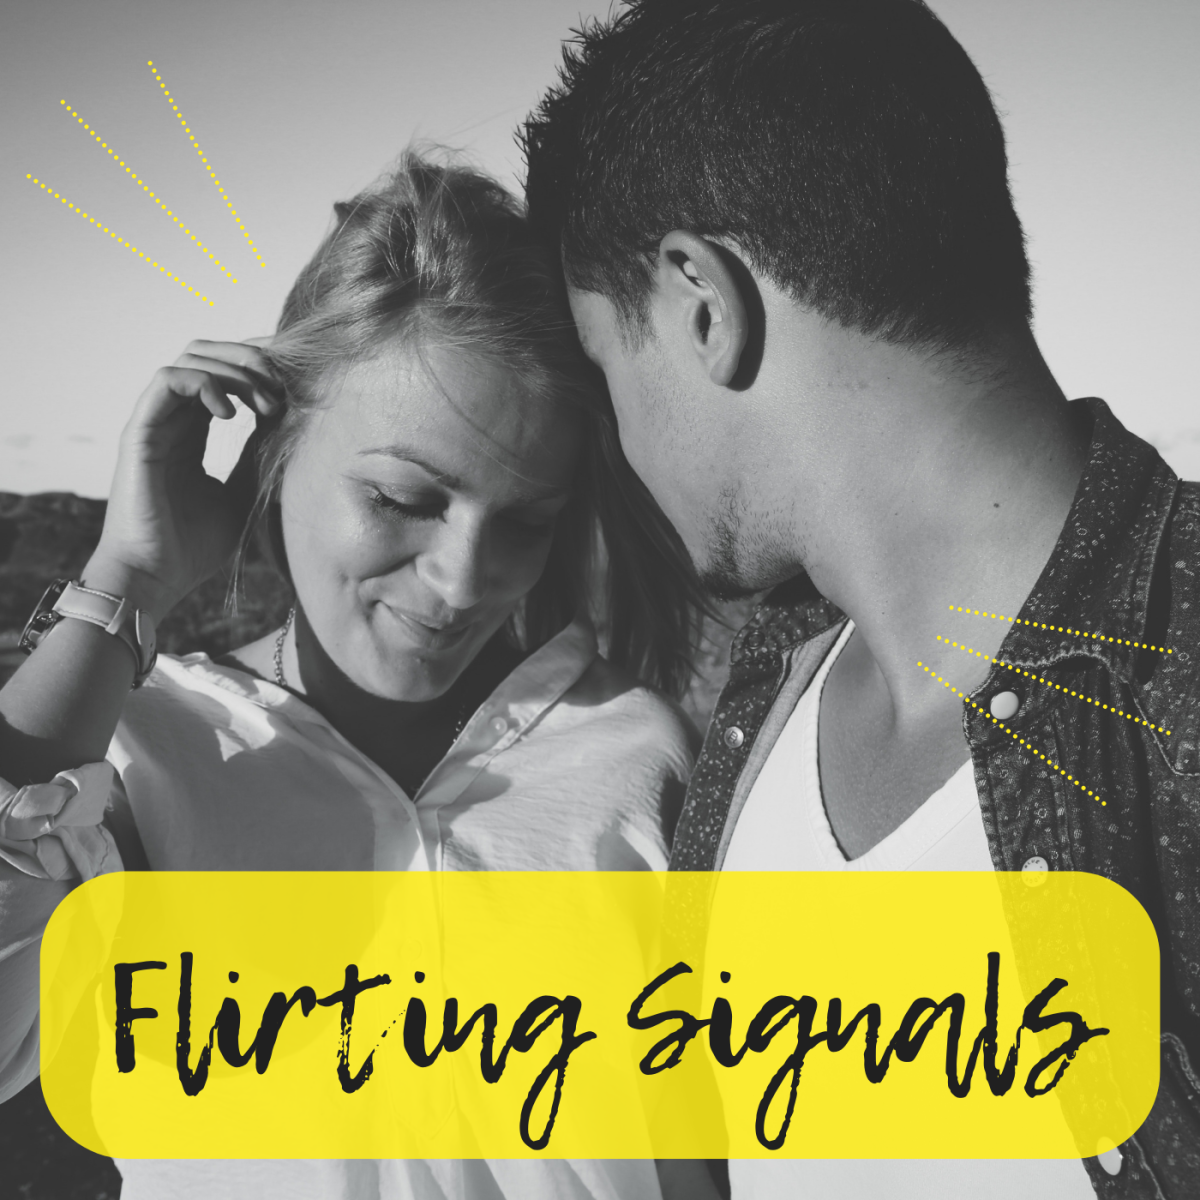 Visible Flirting Signals From Males and Females